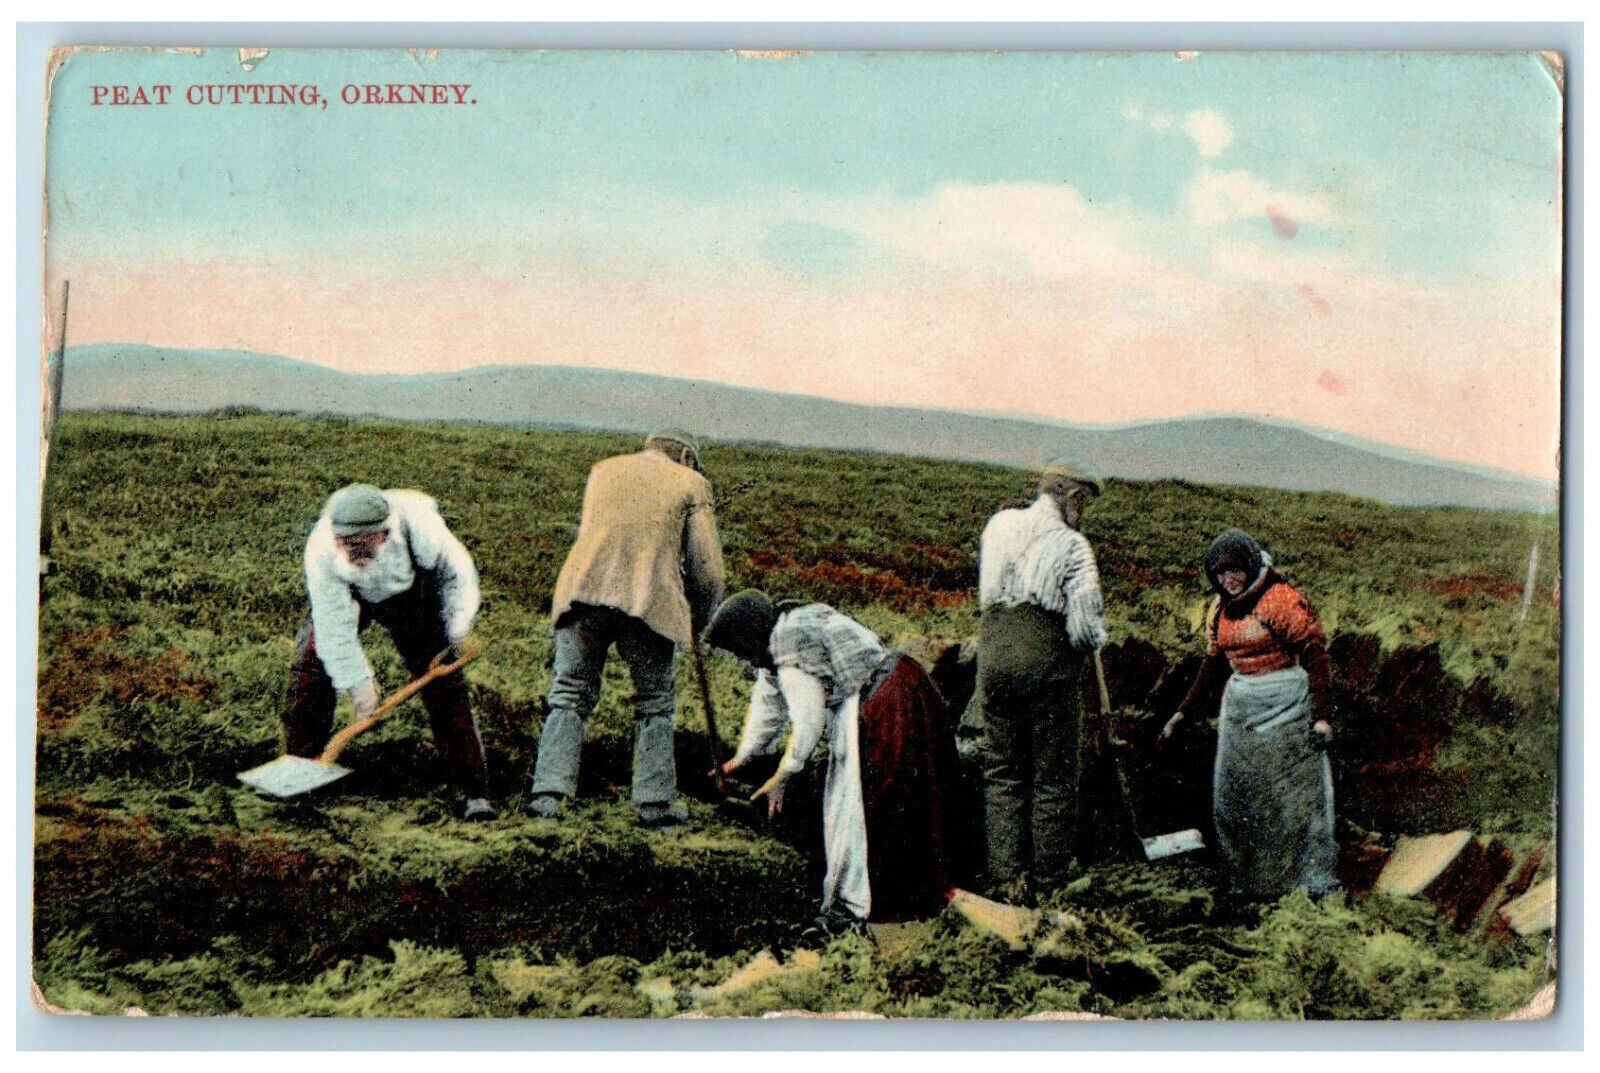 Orkney Scotland Postcard View of Farmers Peat Cutting 1908 Antique Posted